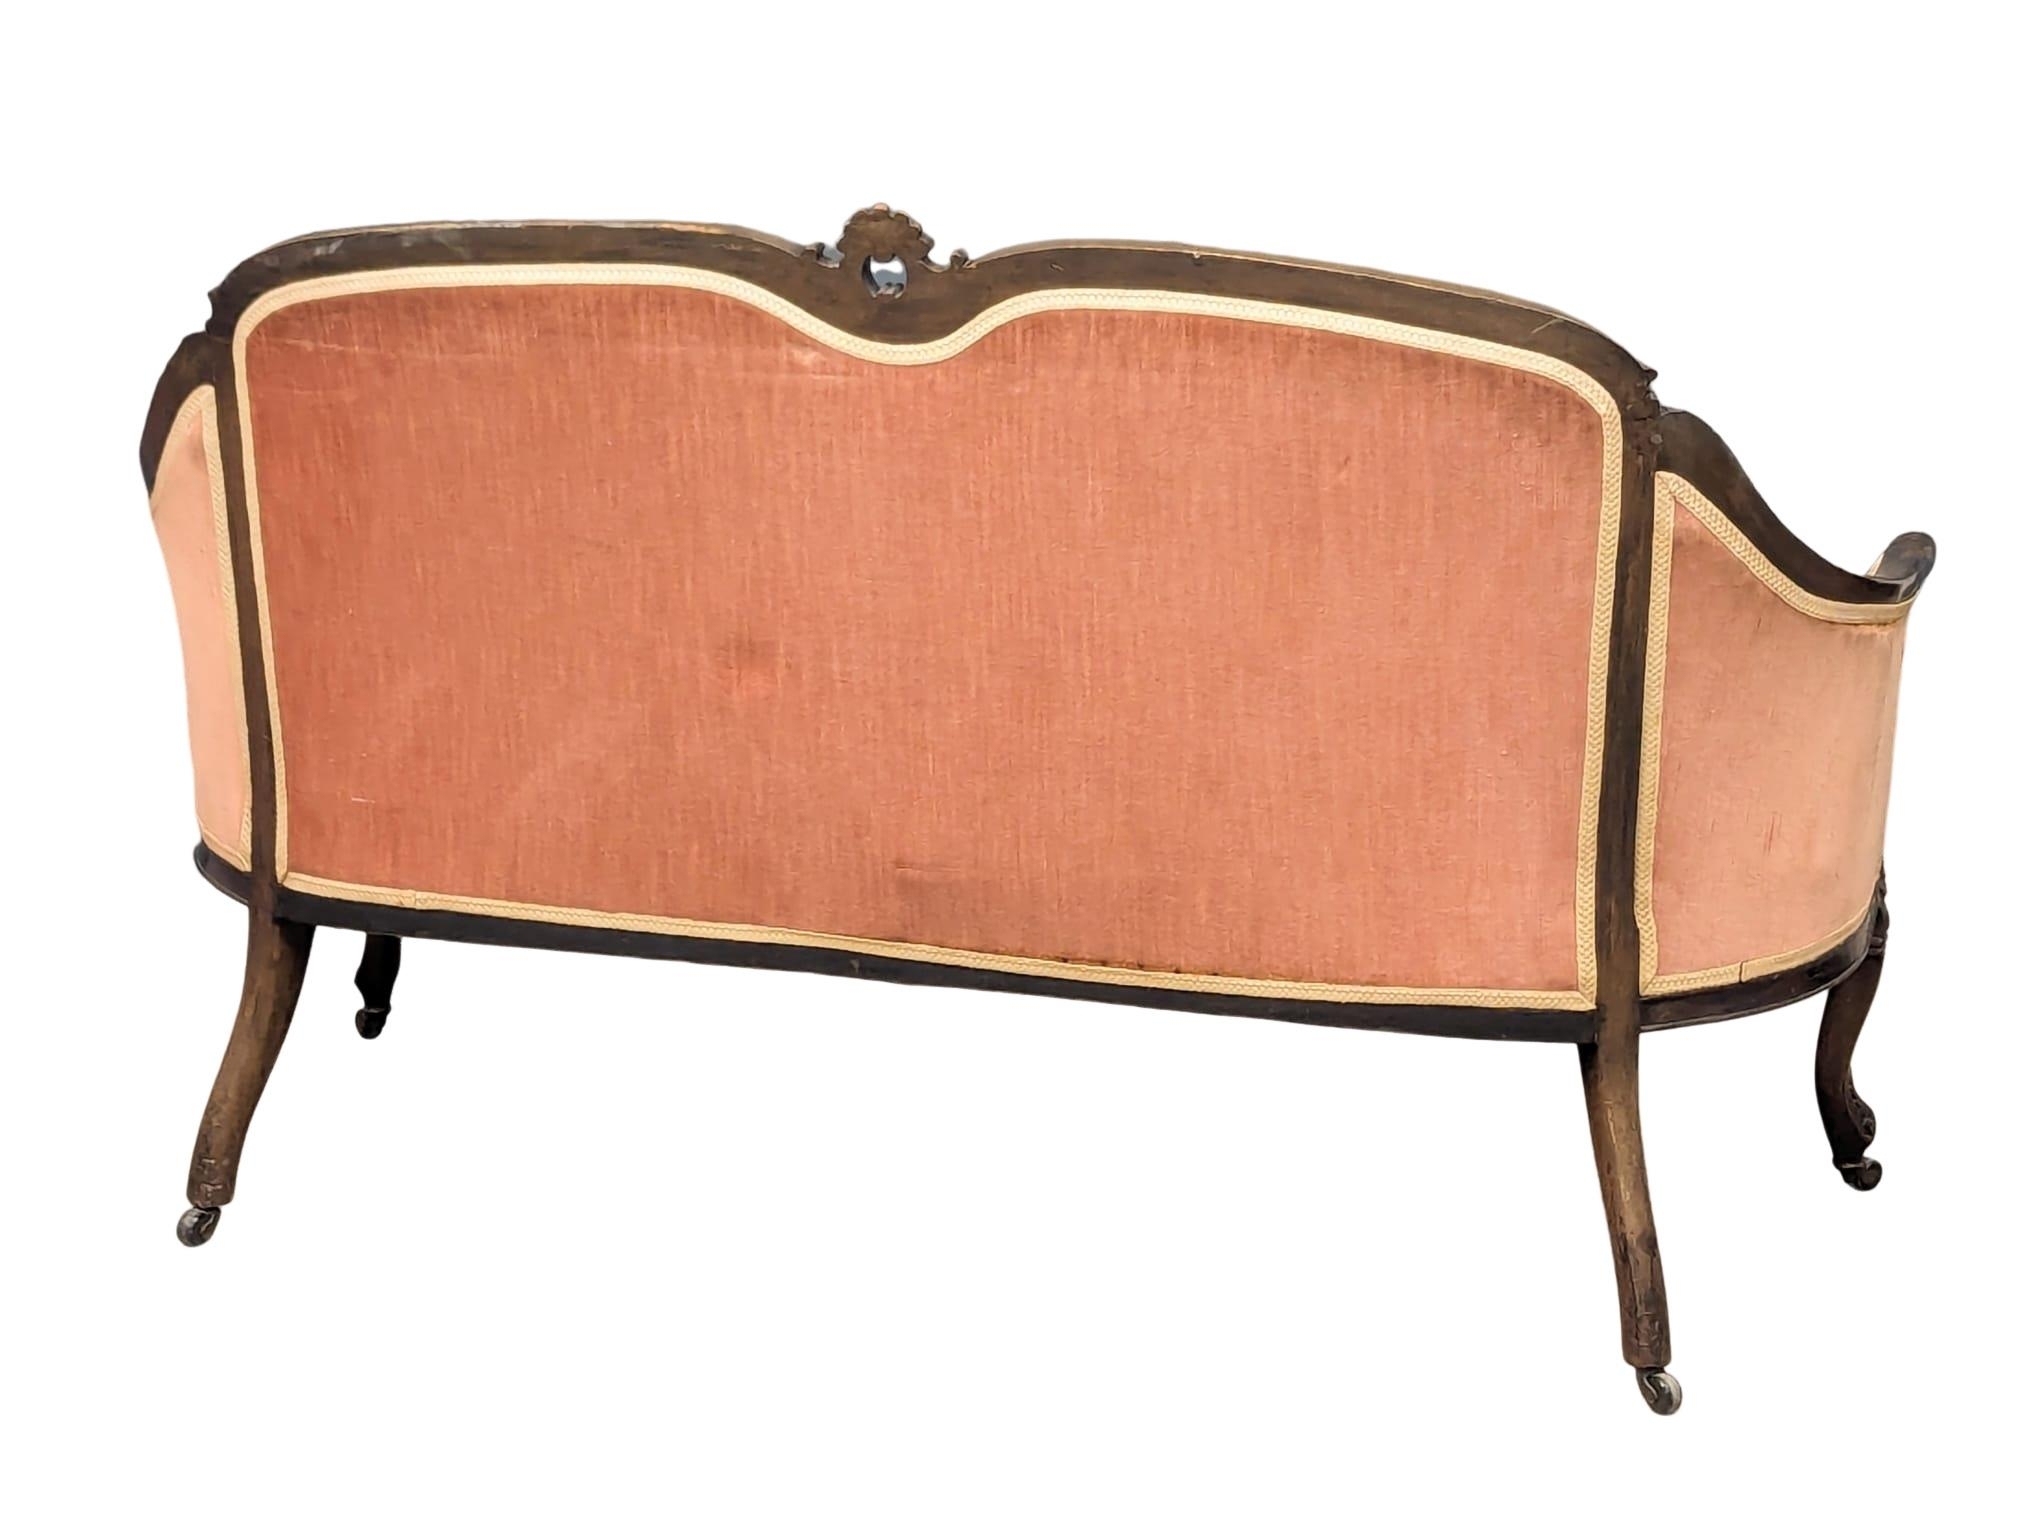 A Late 19th Century / Early 20th Century mahogany sofa on Cabriole legs. 138x67x89cm - Image 3 of 8